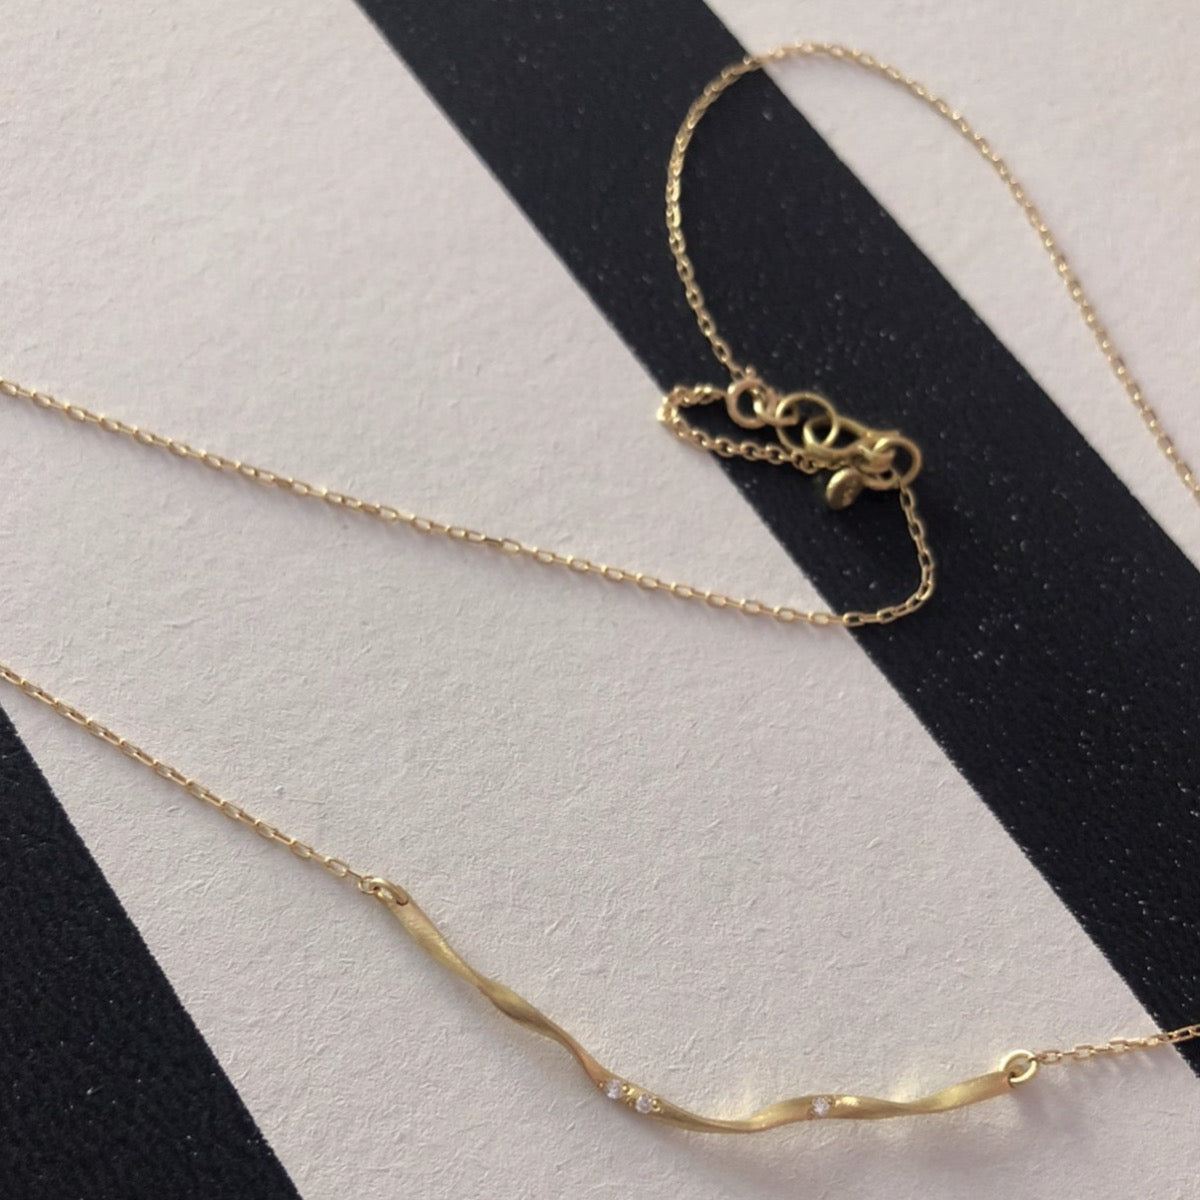 Flair necklace no.1 in 18 kt. recycled gold & 3 diamonds